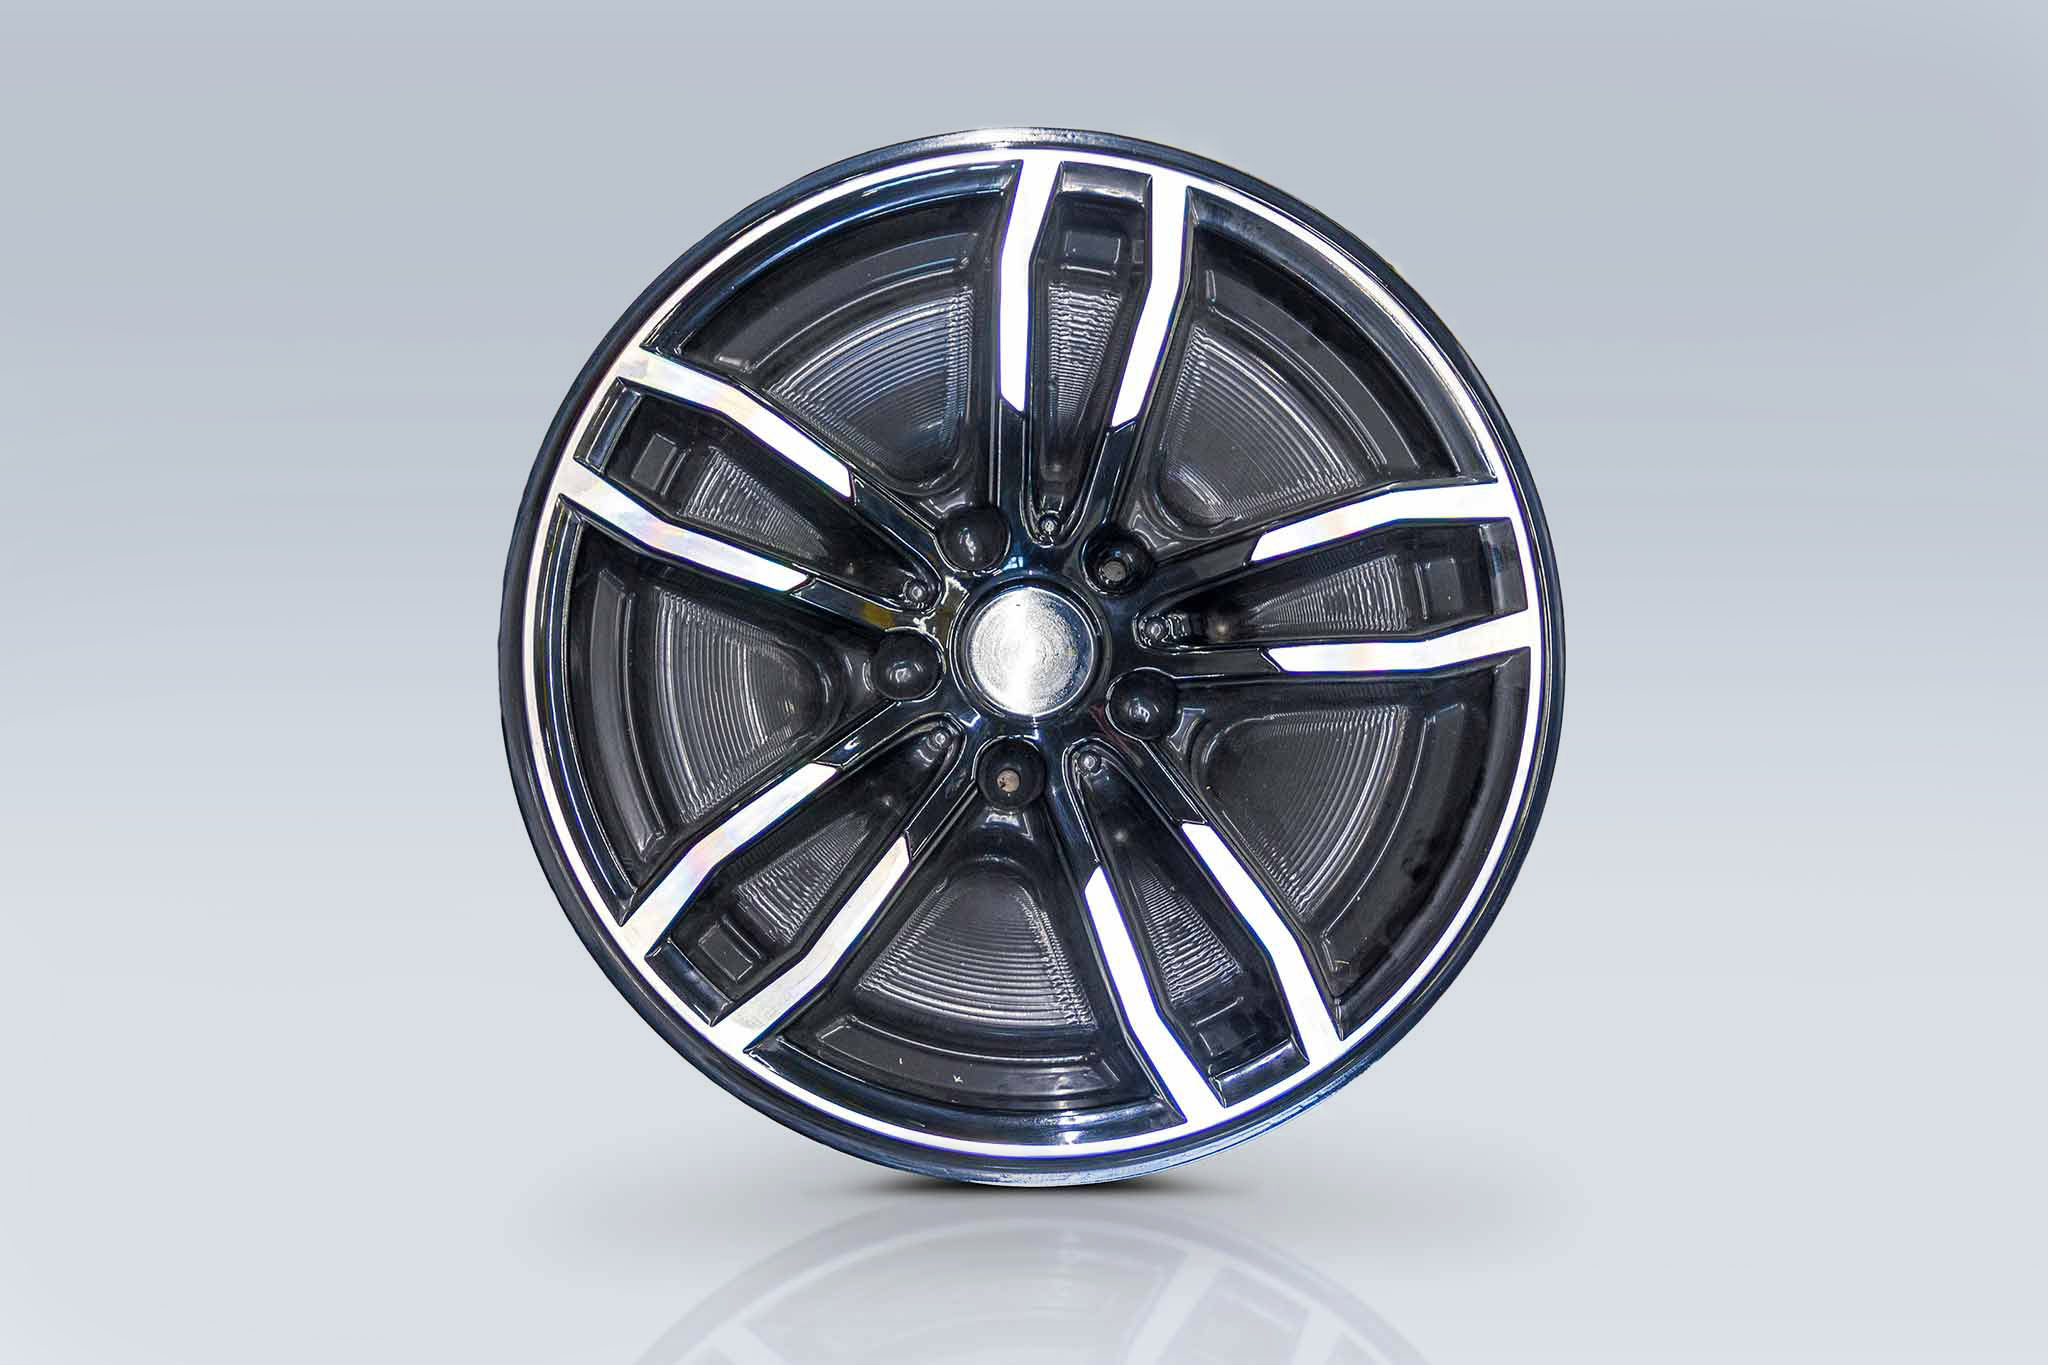 The picture shows a completely machined wheel on a white background.